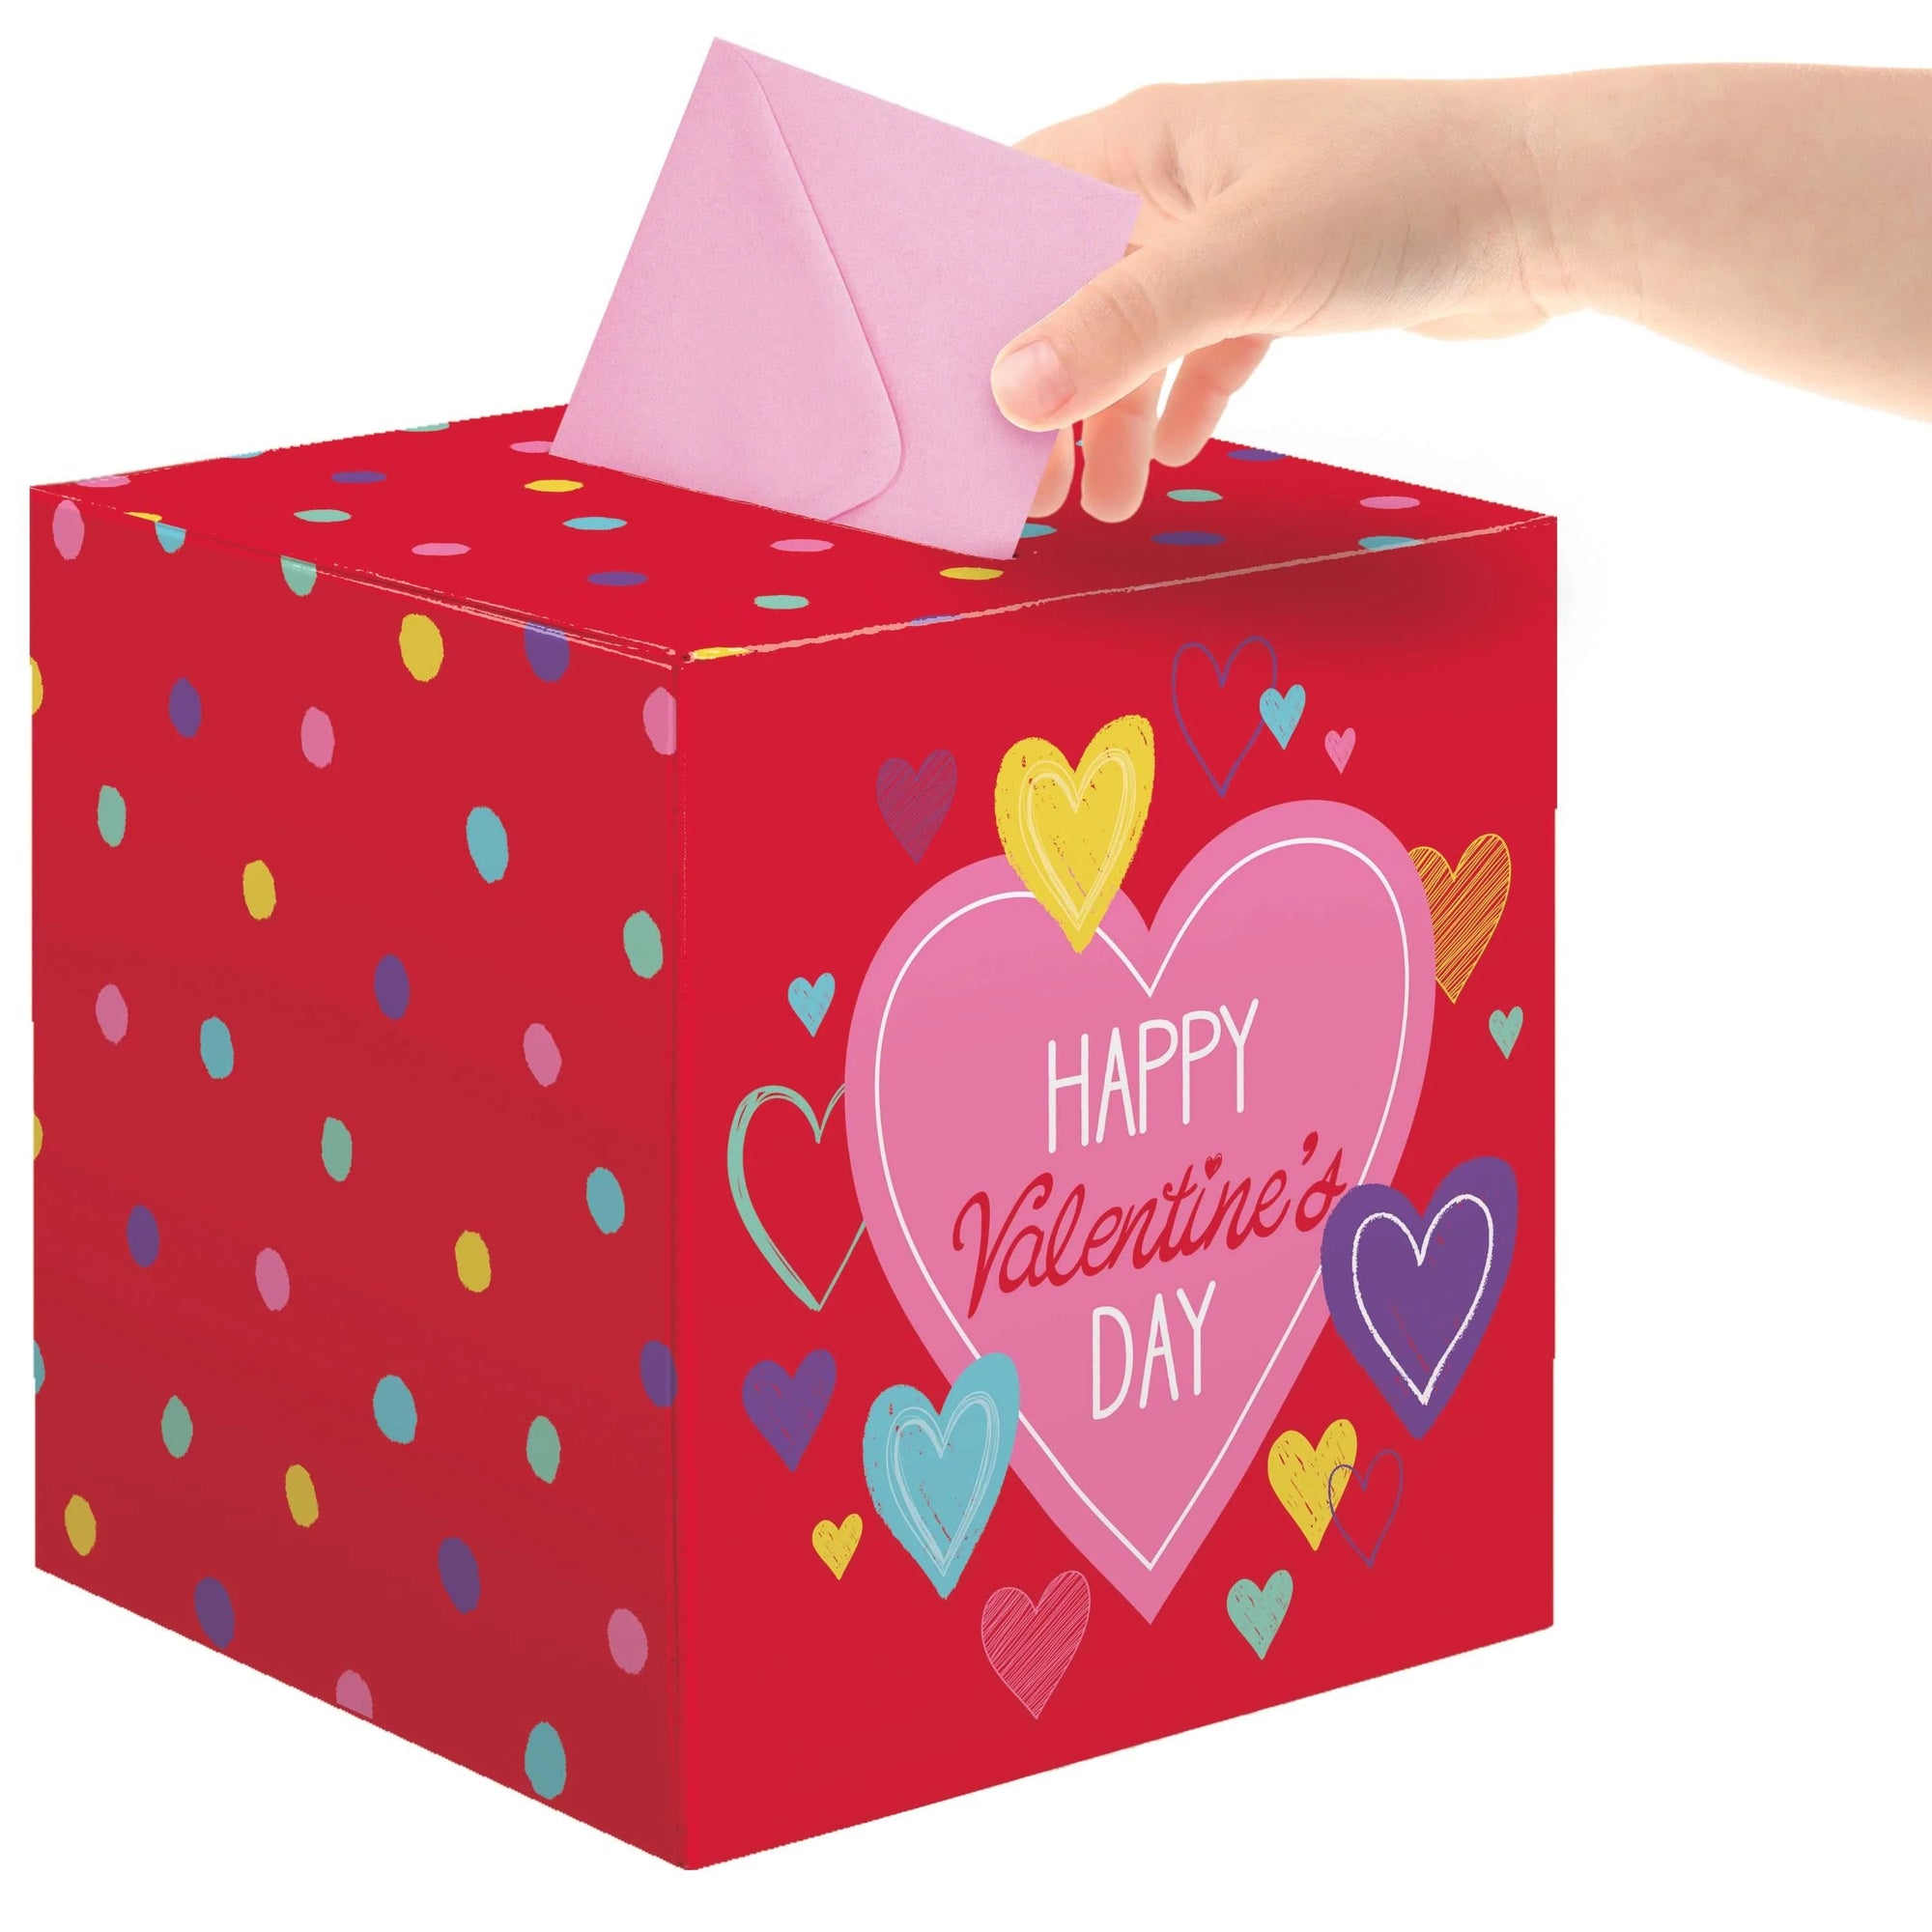 Bulk Case of 6" x 6"  Valentine's Day Card Box by Creative Converting